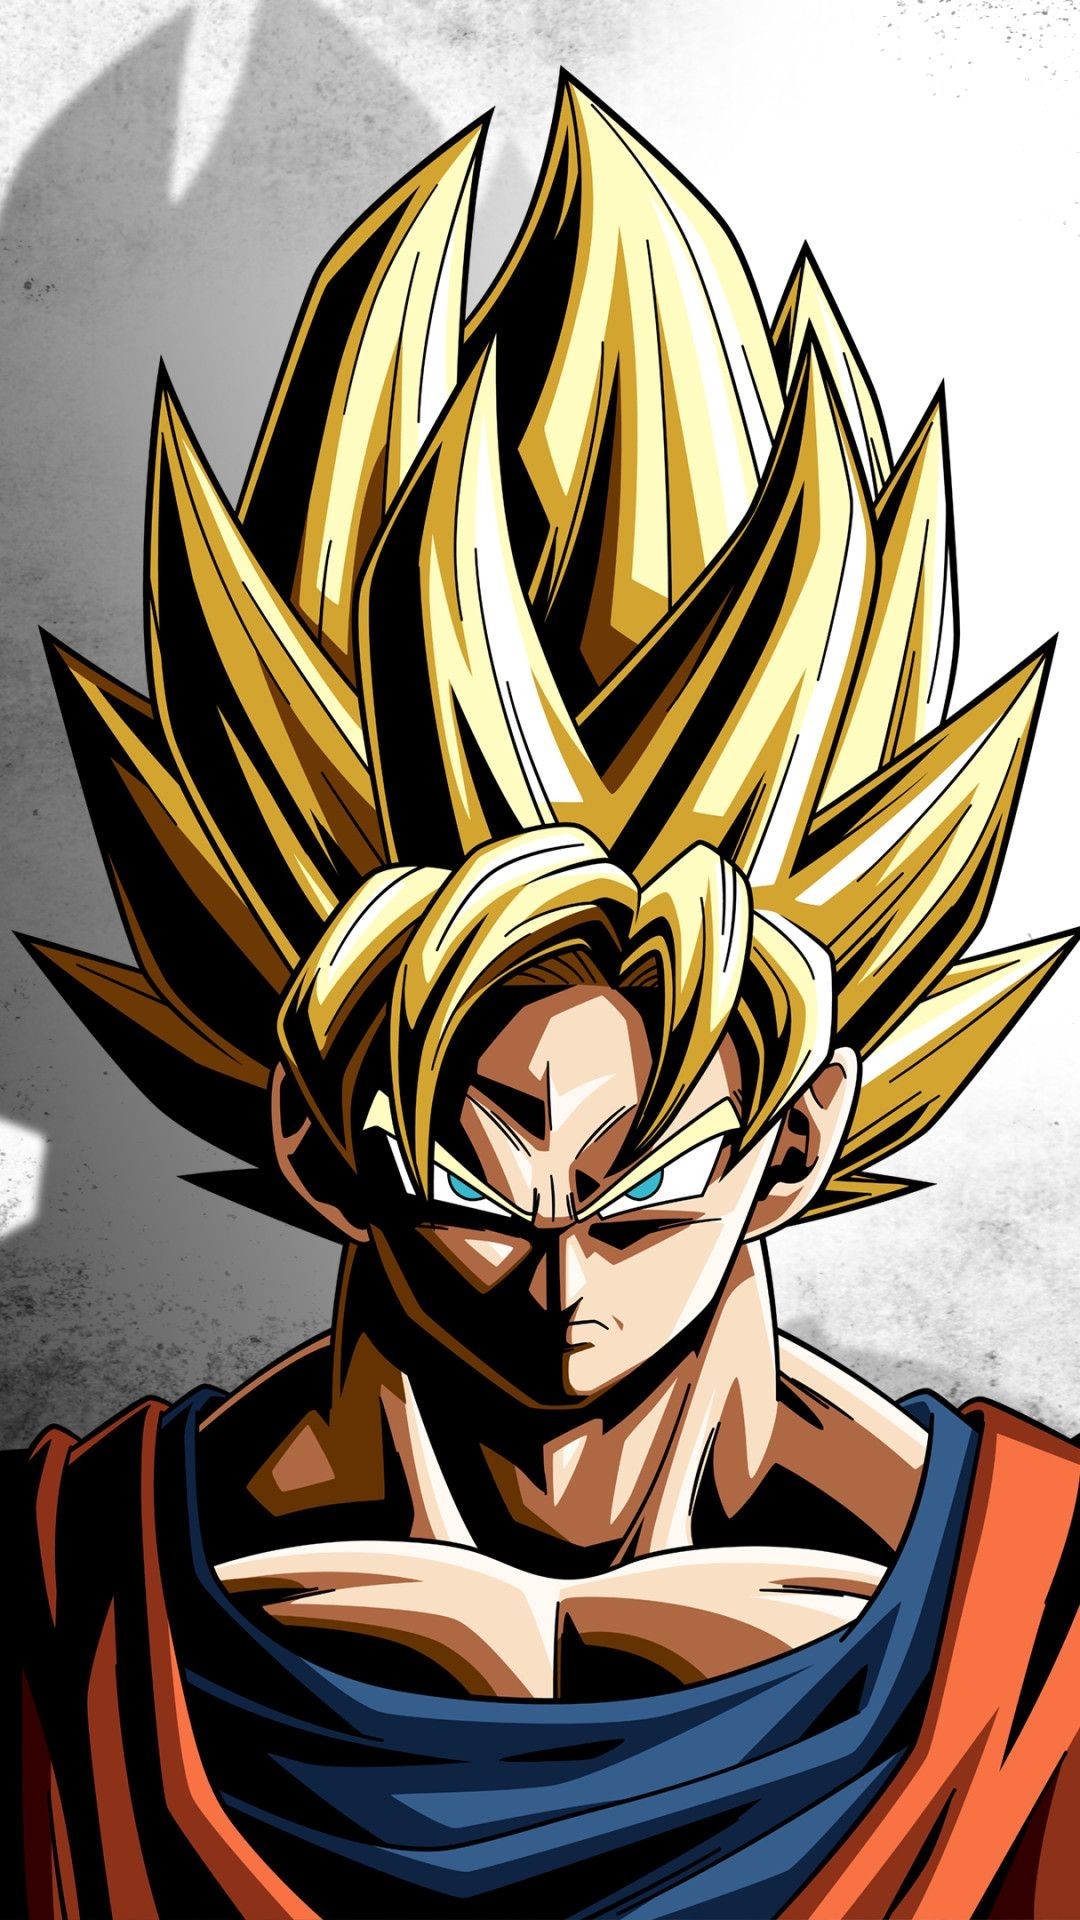 iPhone 7 Wallpaper Goku Super Saiyan with image resolution 1080x1920 pixel. You can make this wallpaper for your iPhone 5, 6, 7, 8, X backgrounds, Mobile Screensaver, or iPad Lock Screen